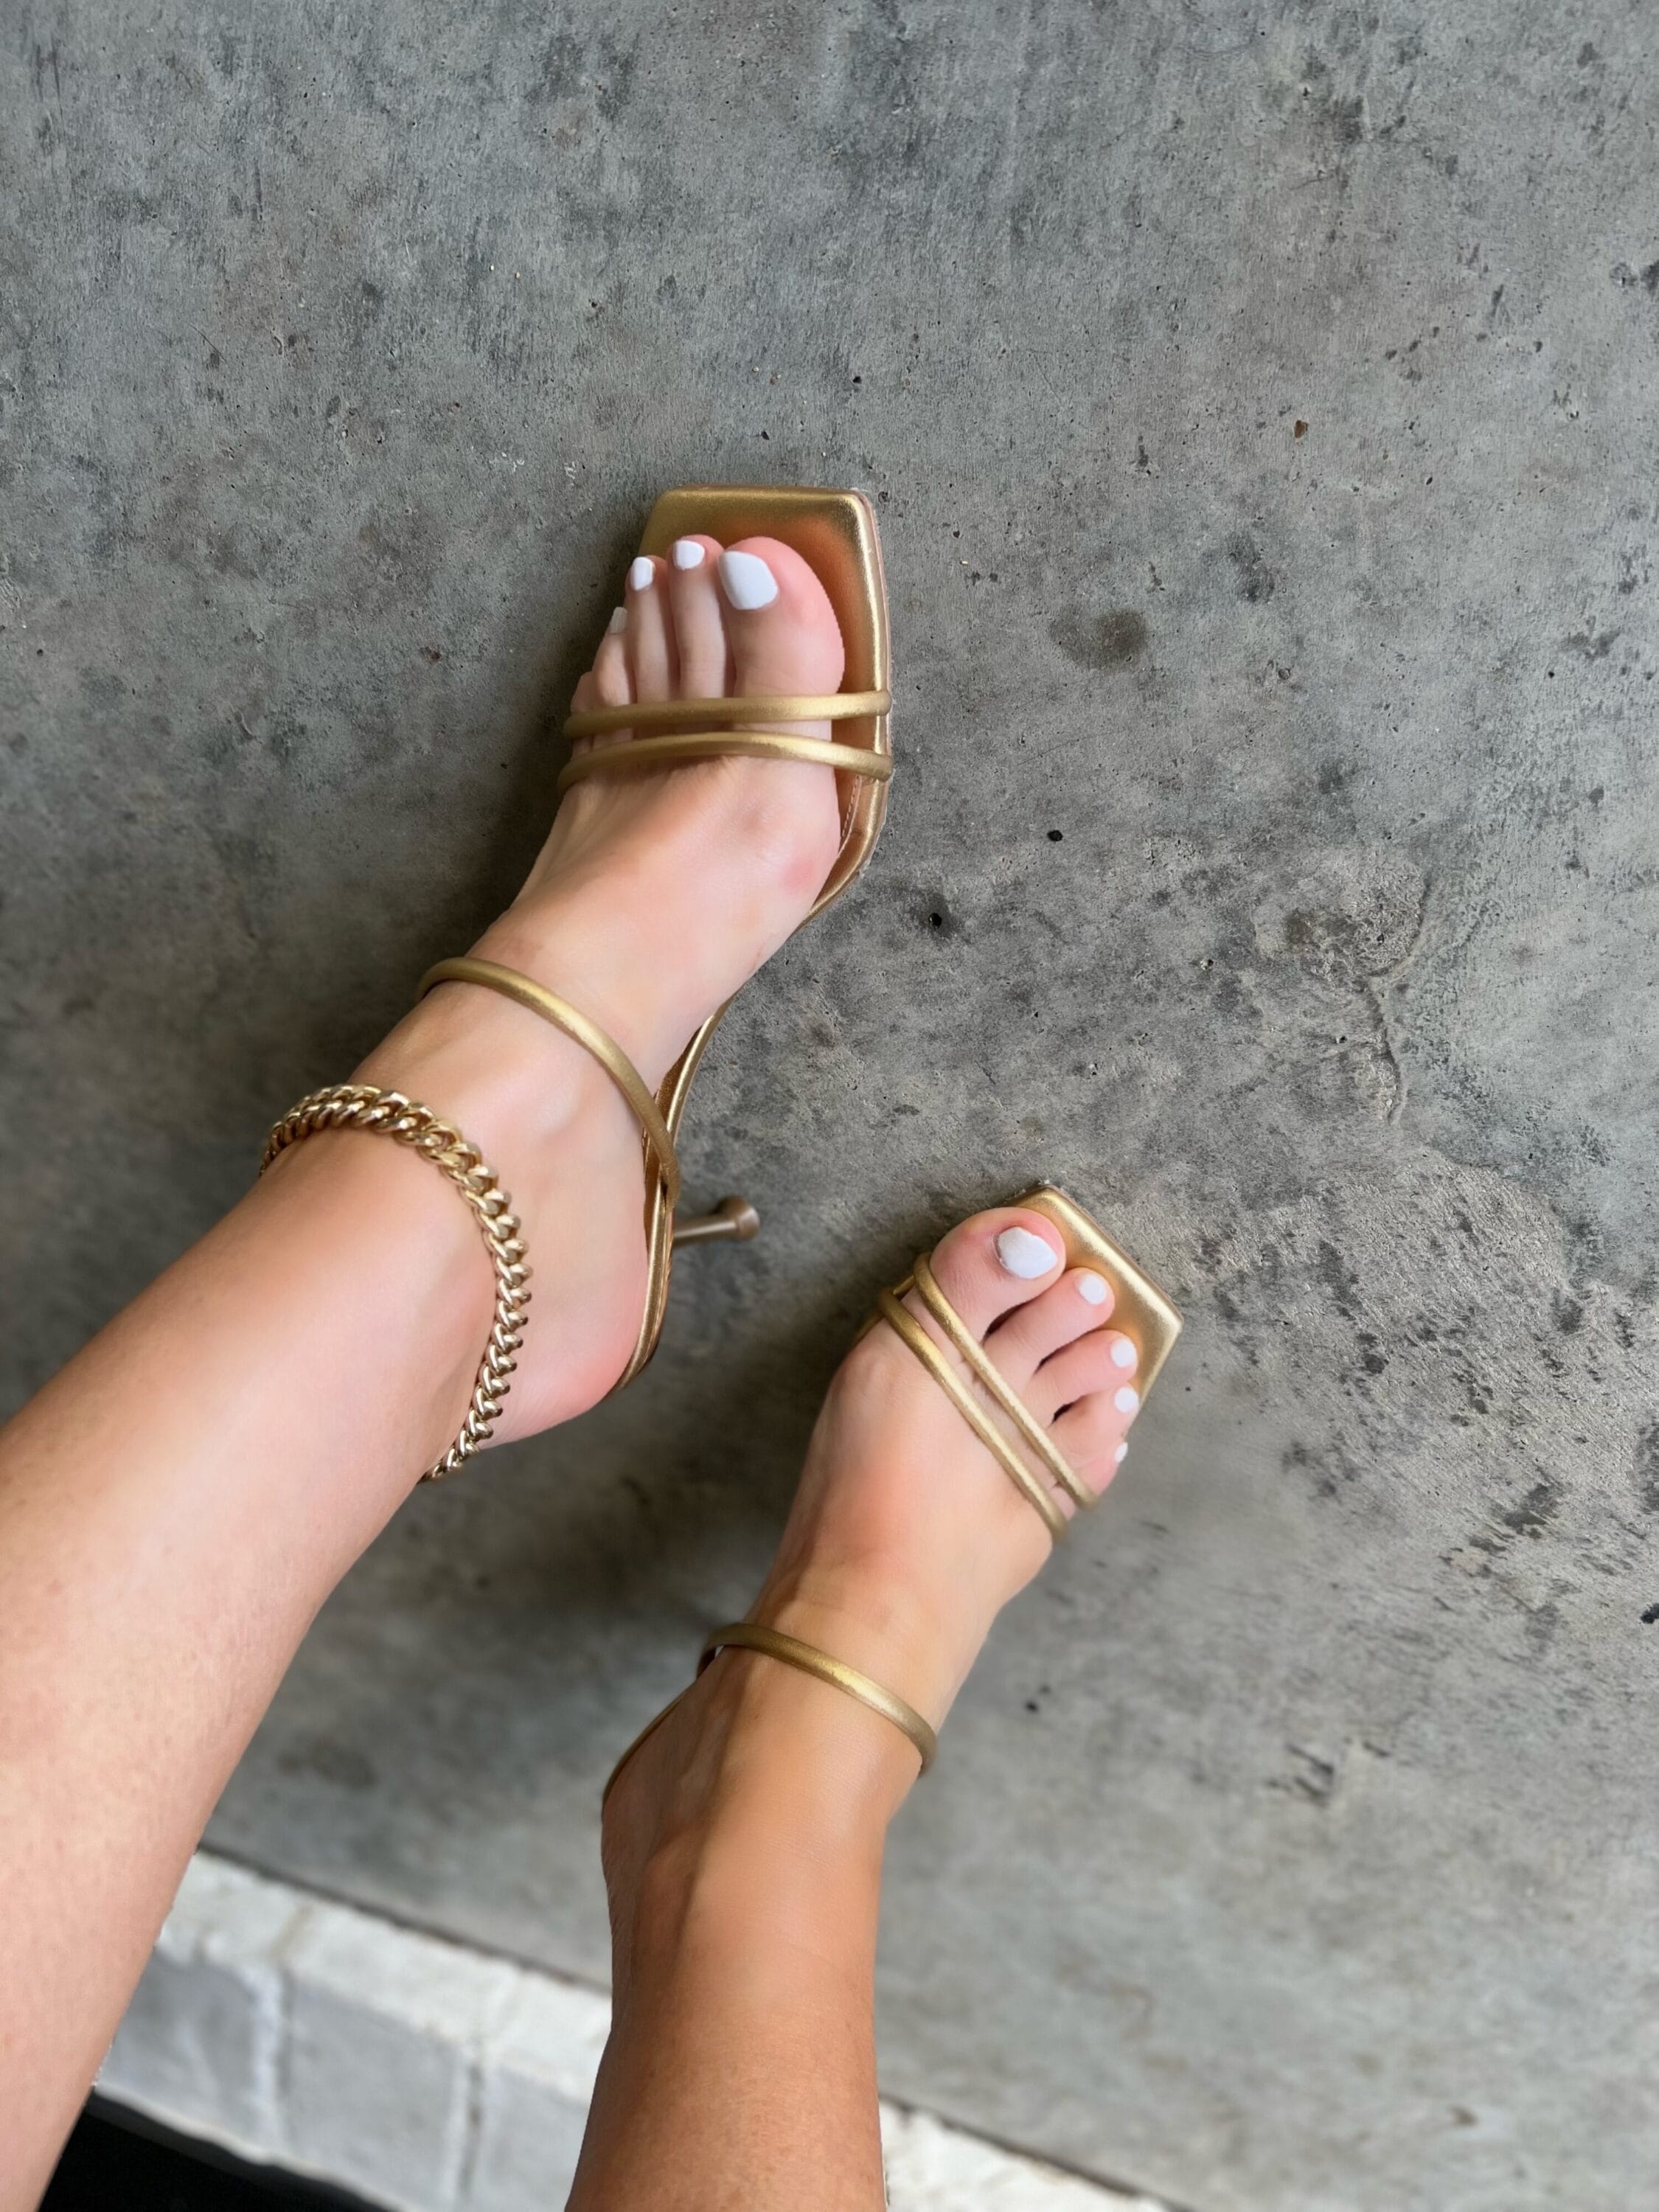 Dallas fashion blogger over 40 wearing gold strappy sandals